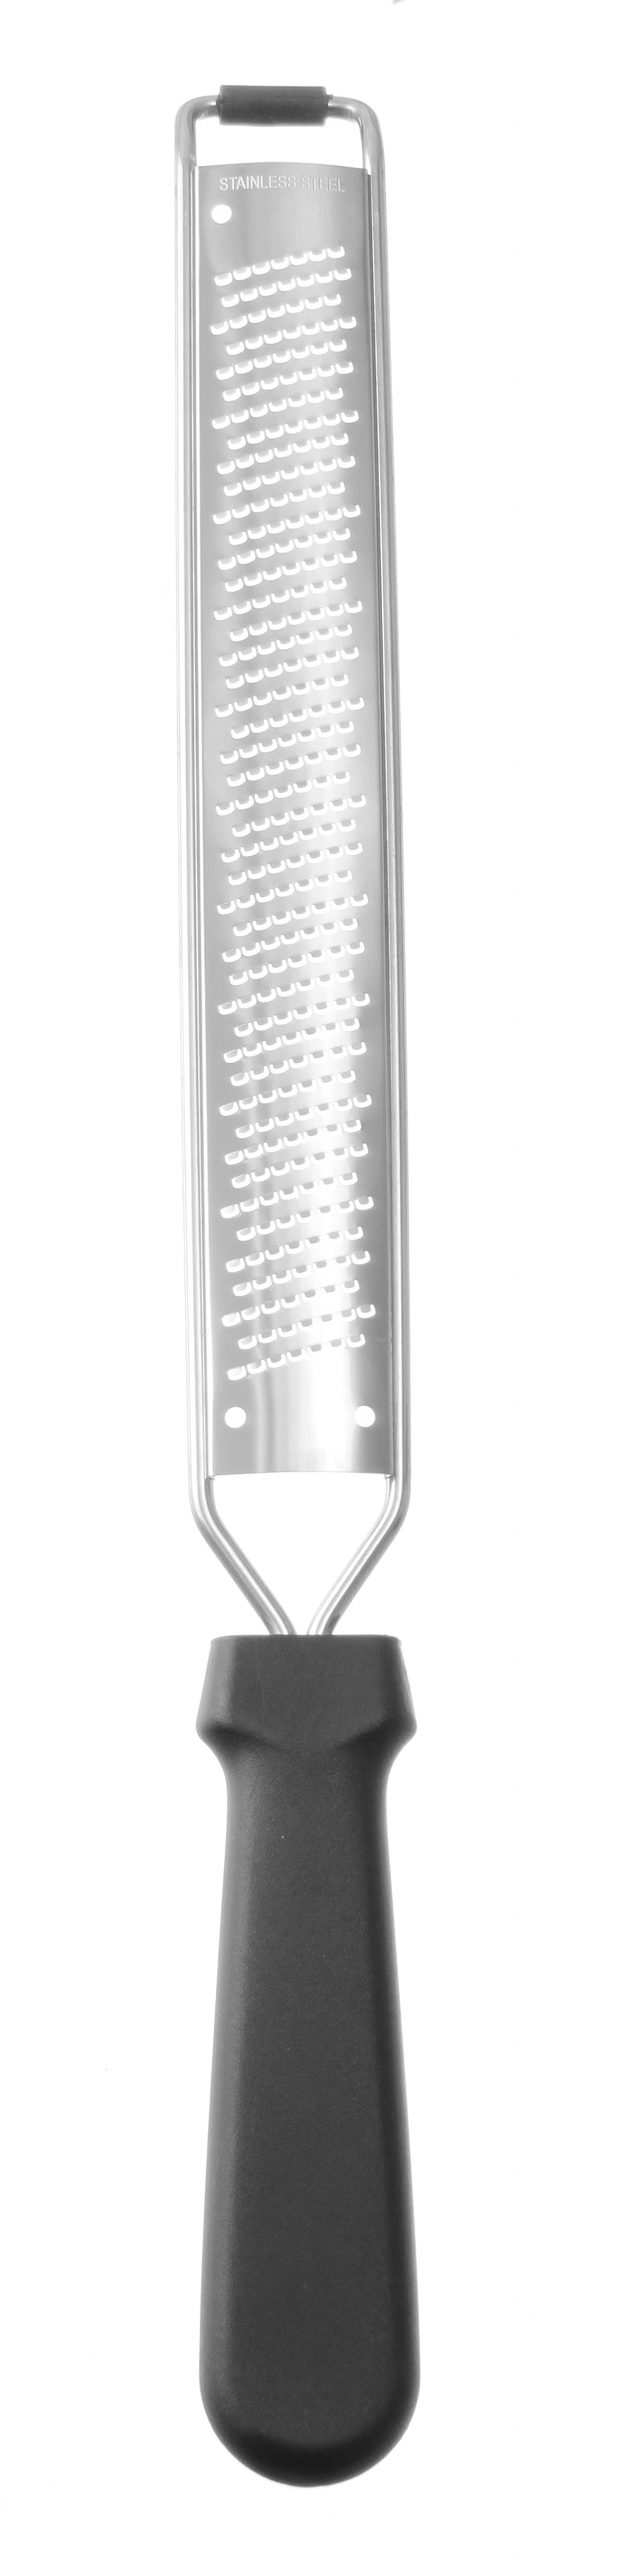 THIN GRATER MICROPLAINE 39CM. 856352